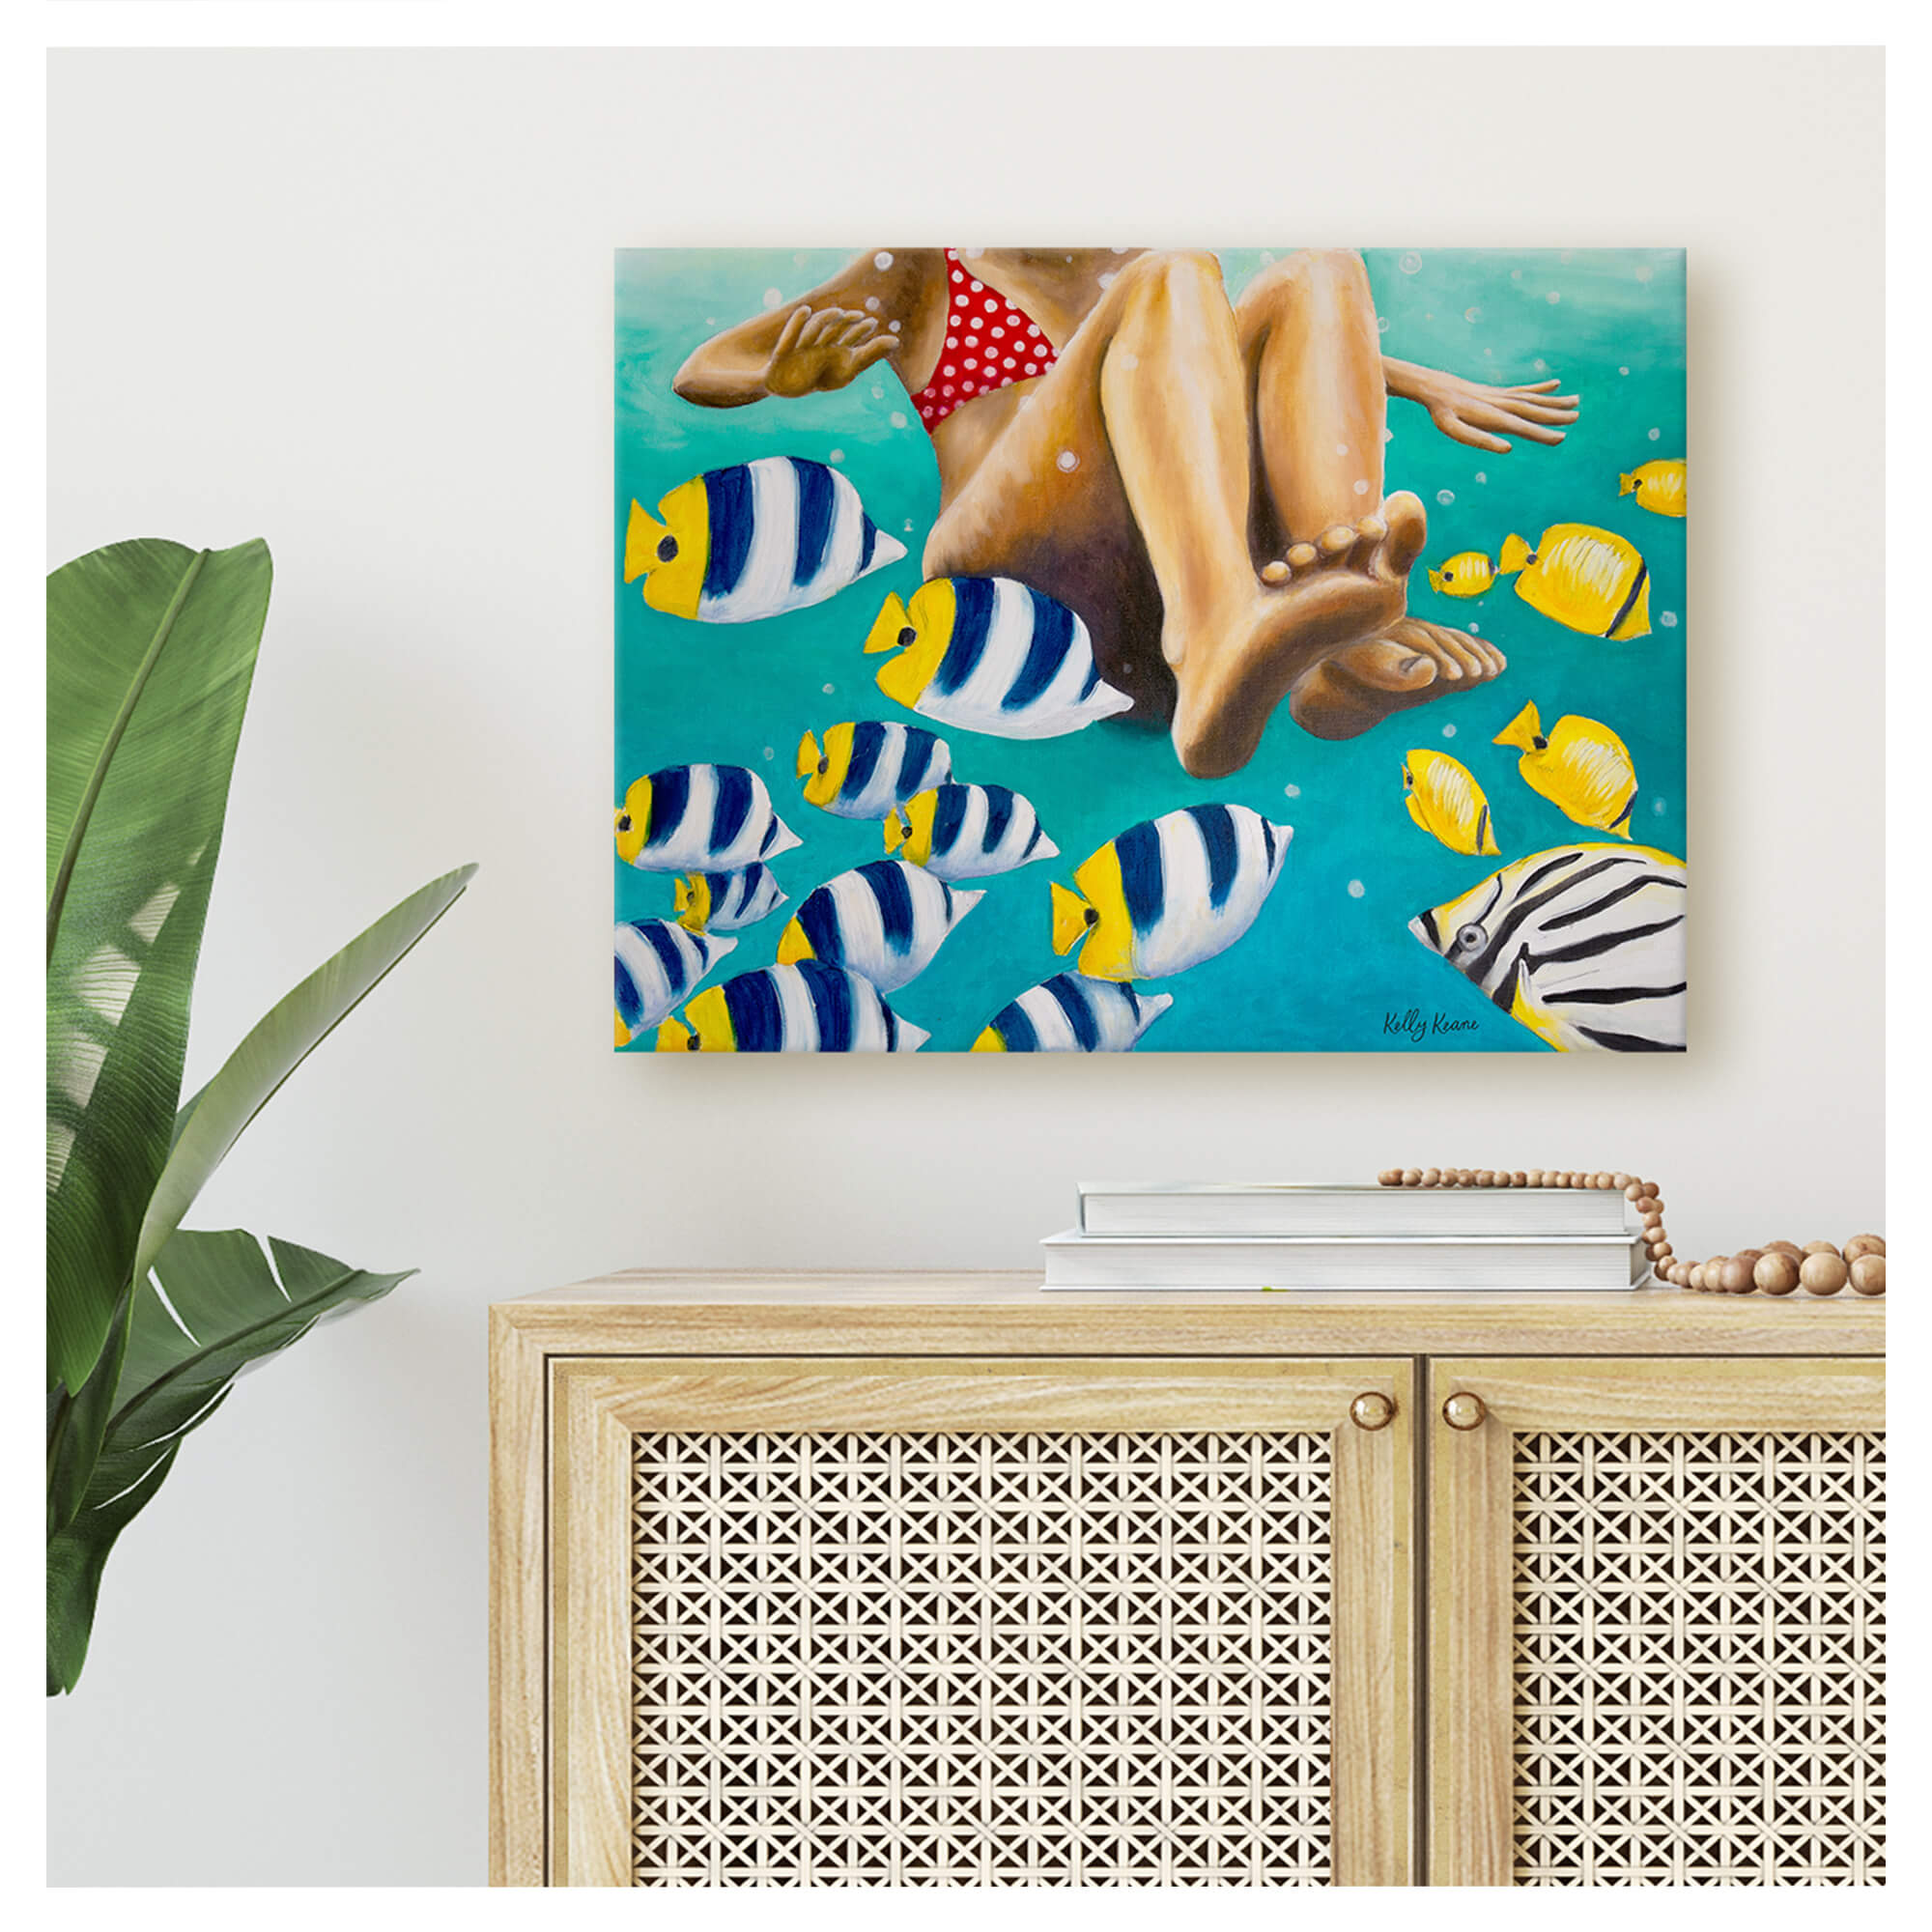 Canvas art print featuring a girl swimming with fishes by hawaii artist Kelly Keane